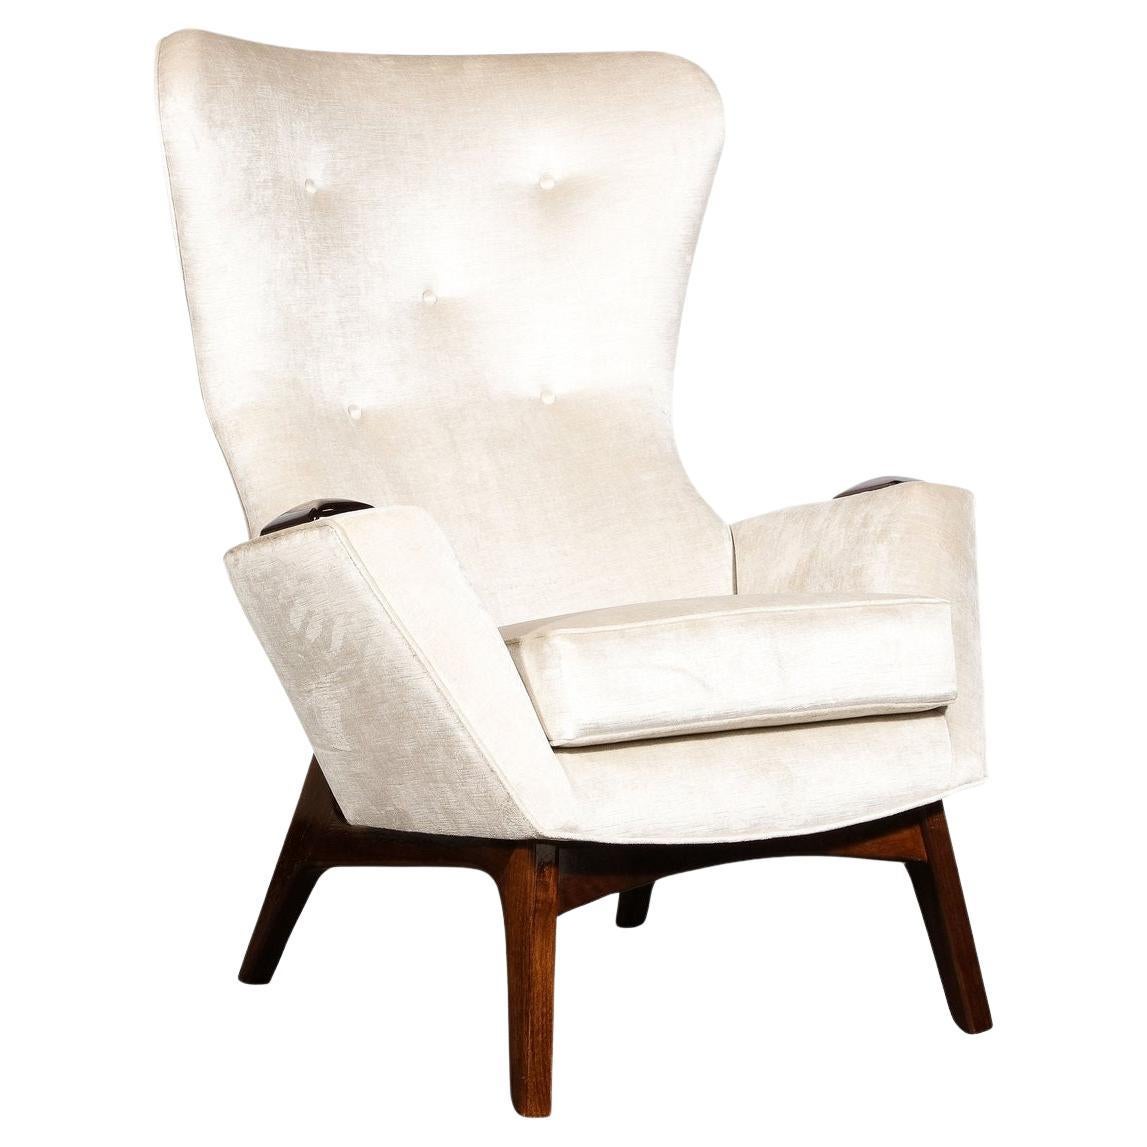 Walnut & Velvet Wing High Button Back Adrian Pearsall Chair For Sale